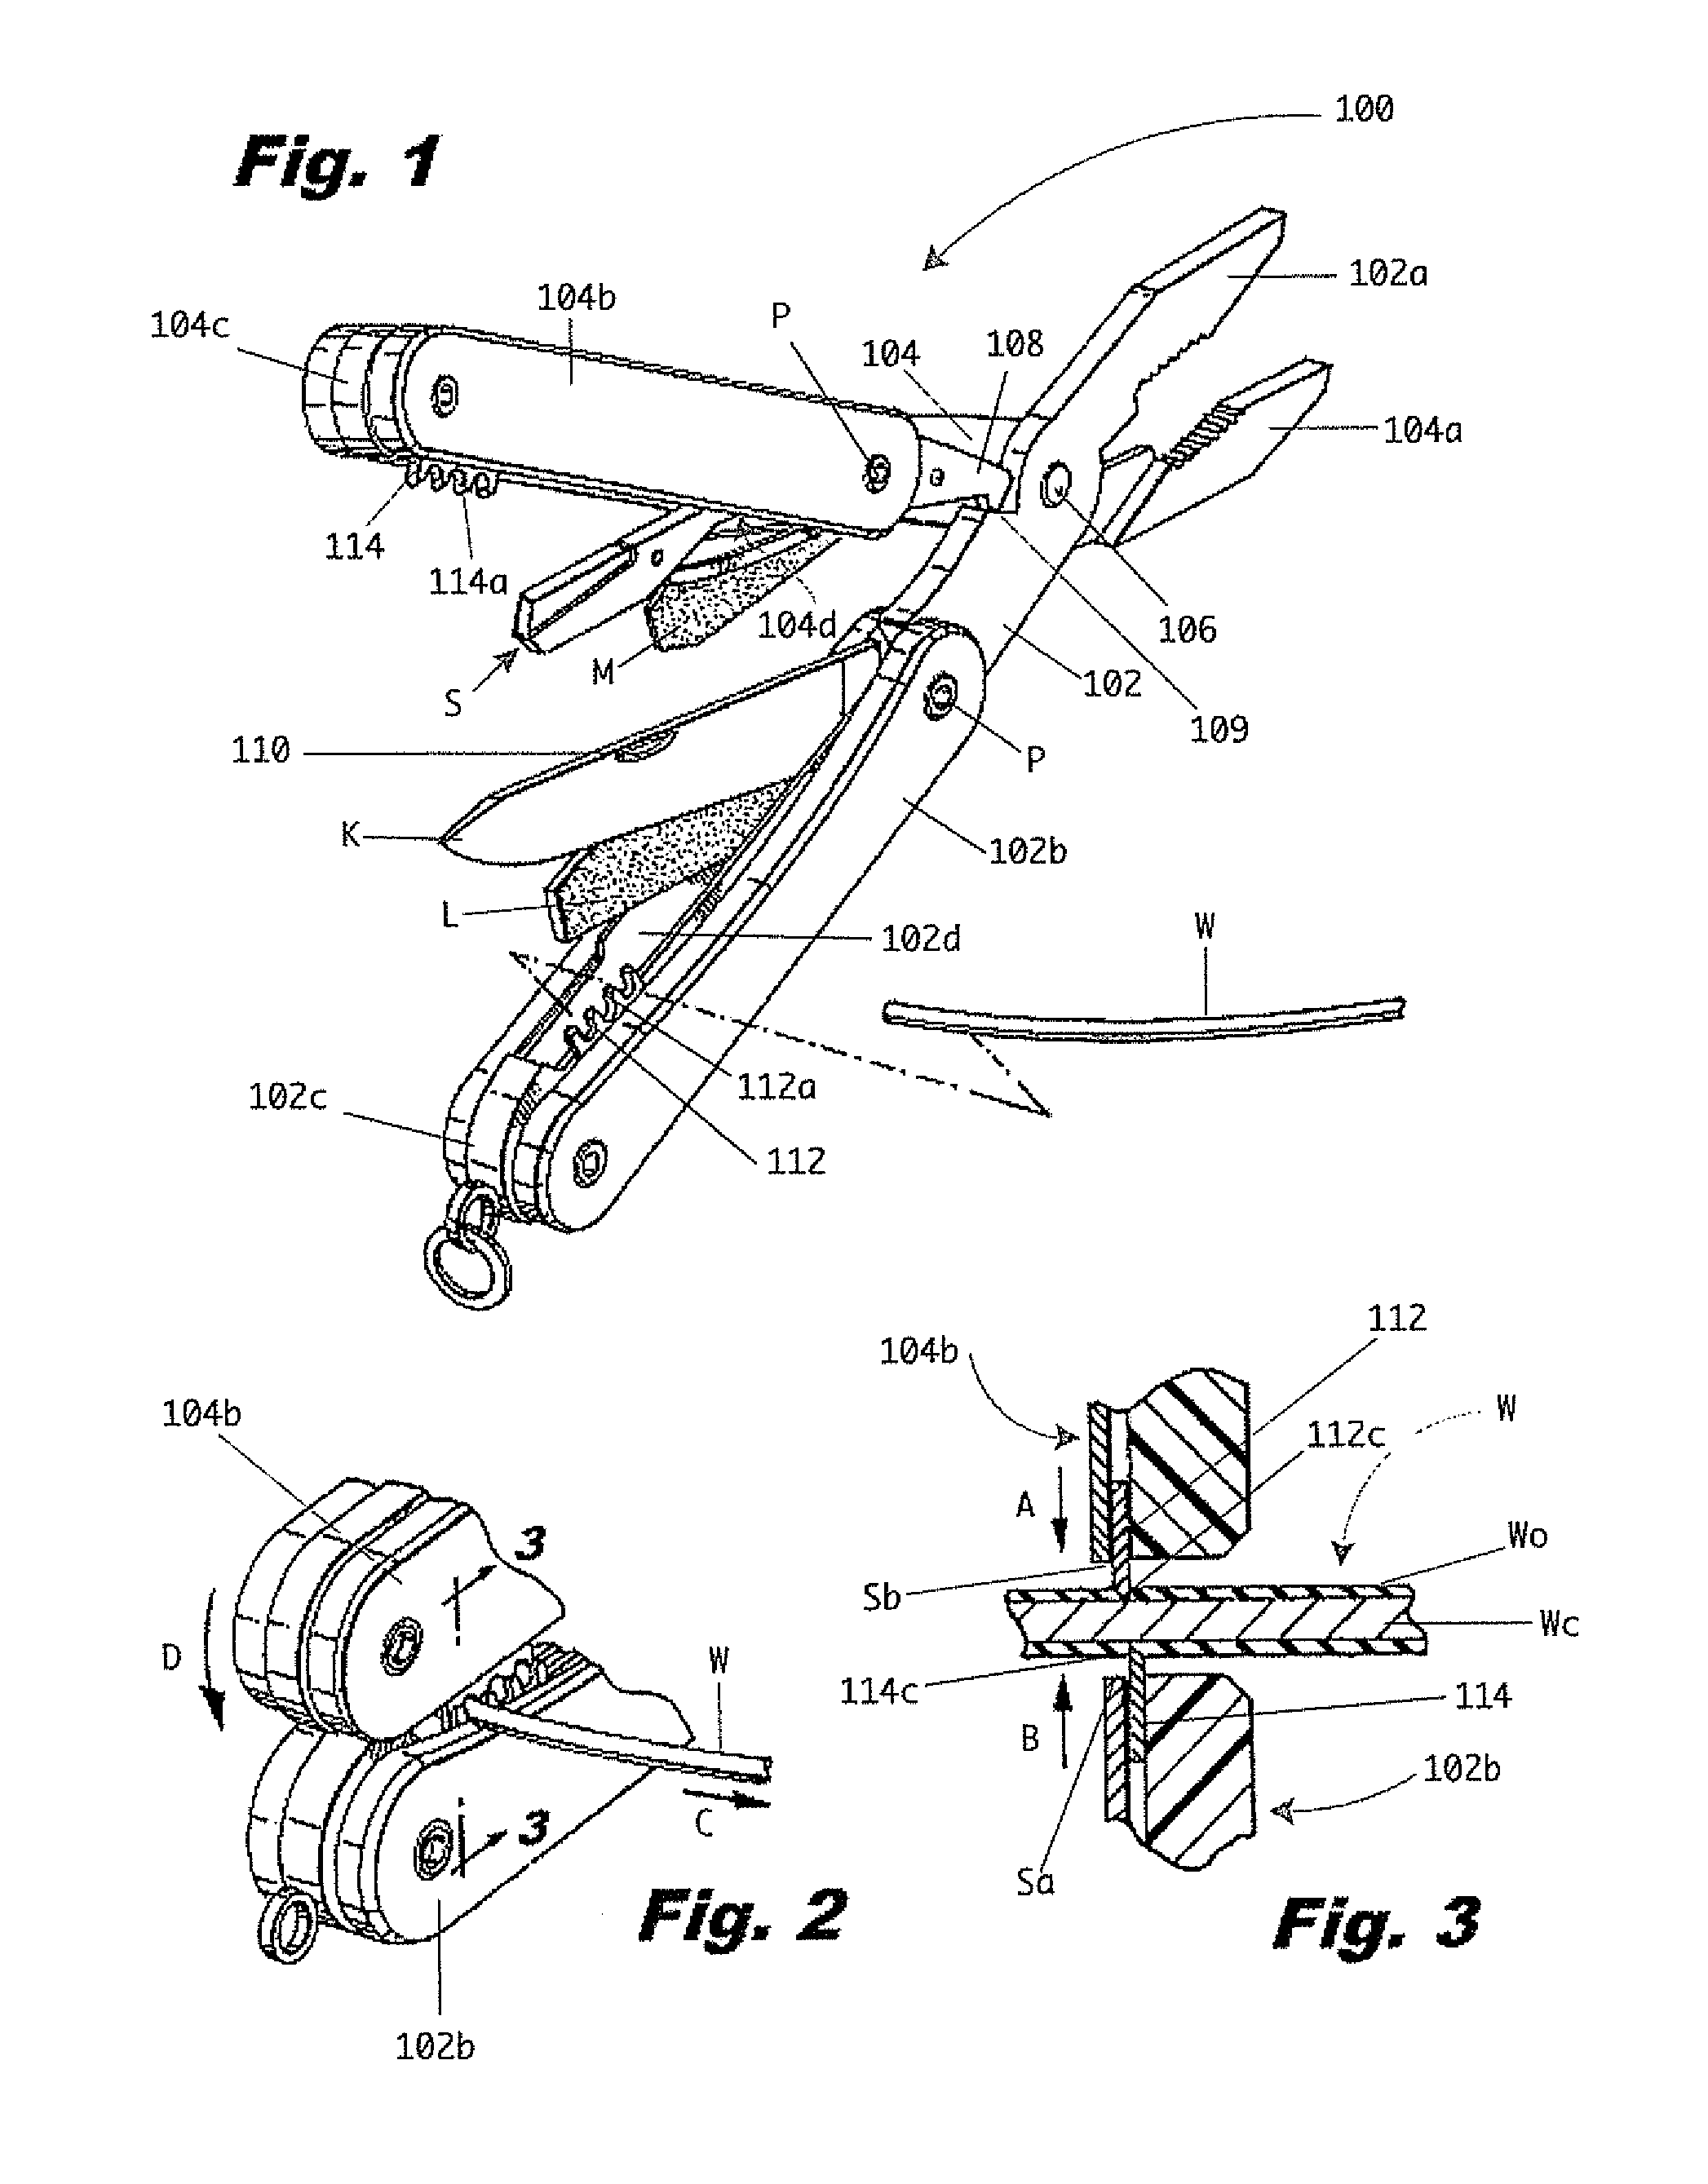 Multi-function wire stripping hand tool and kit and method for using the same